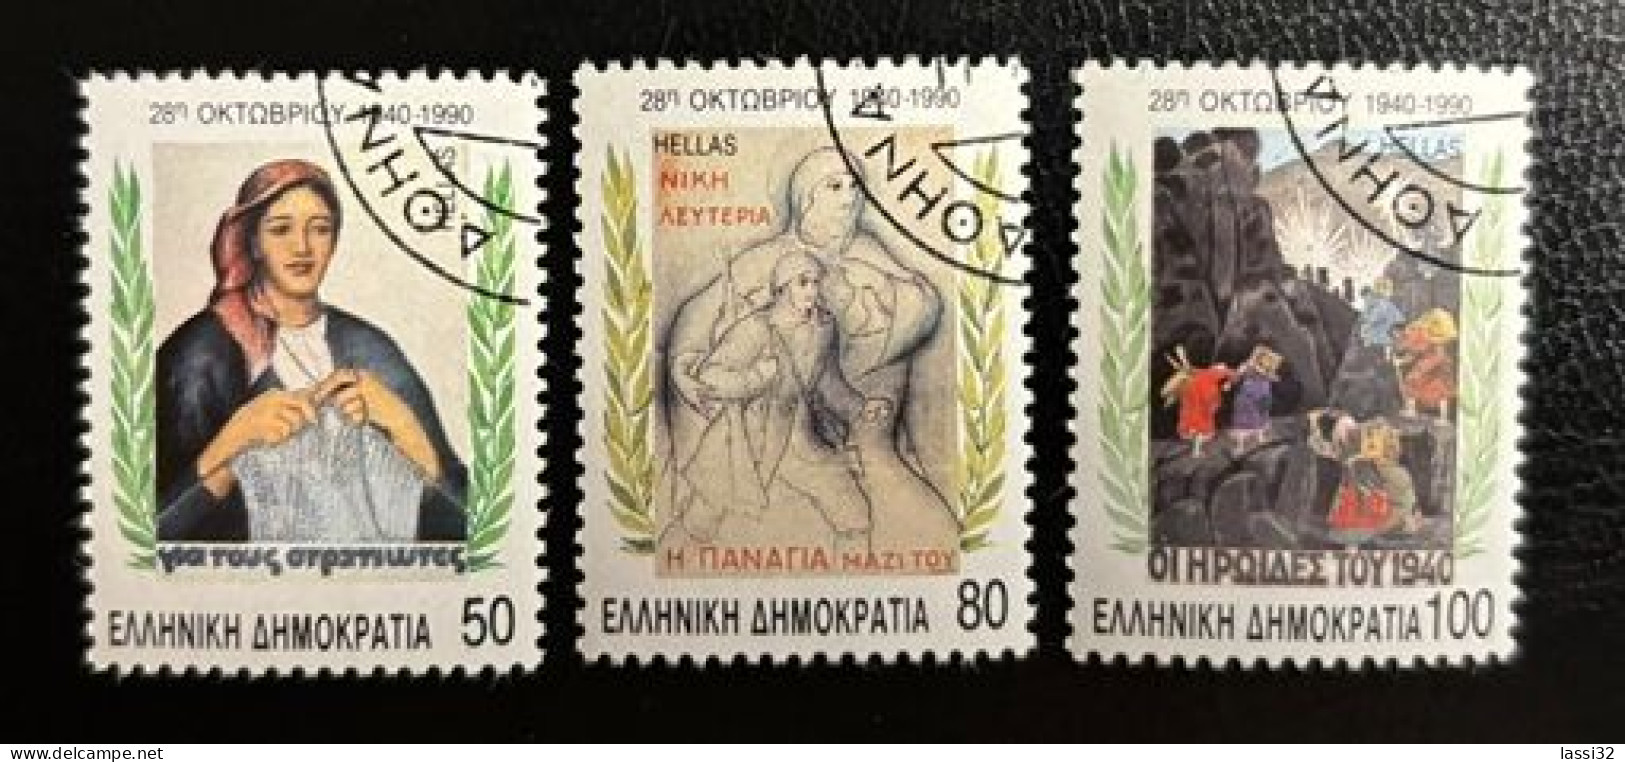 GREECE,1990. 50th ANNIVERSARY OF "NO" OCTOBER 28th 1940, USED - Oblitérés